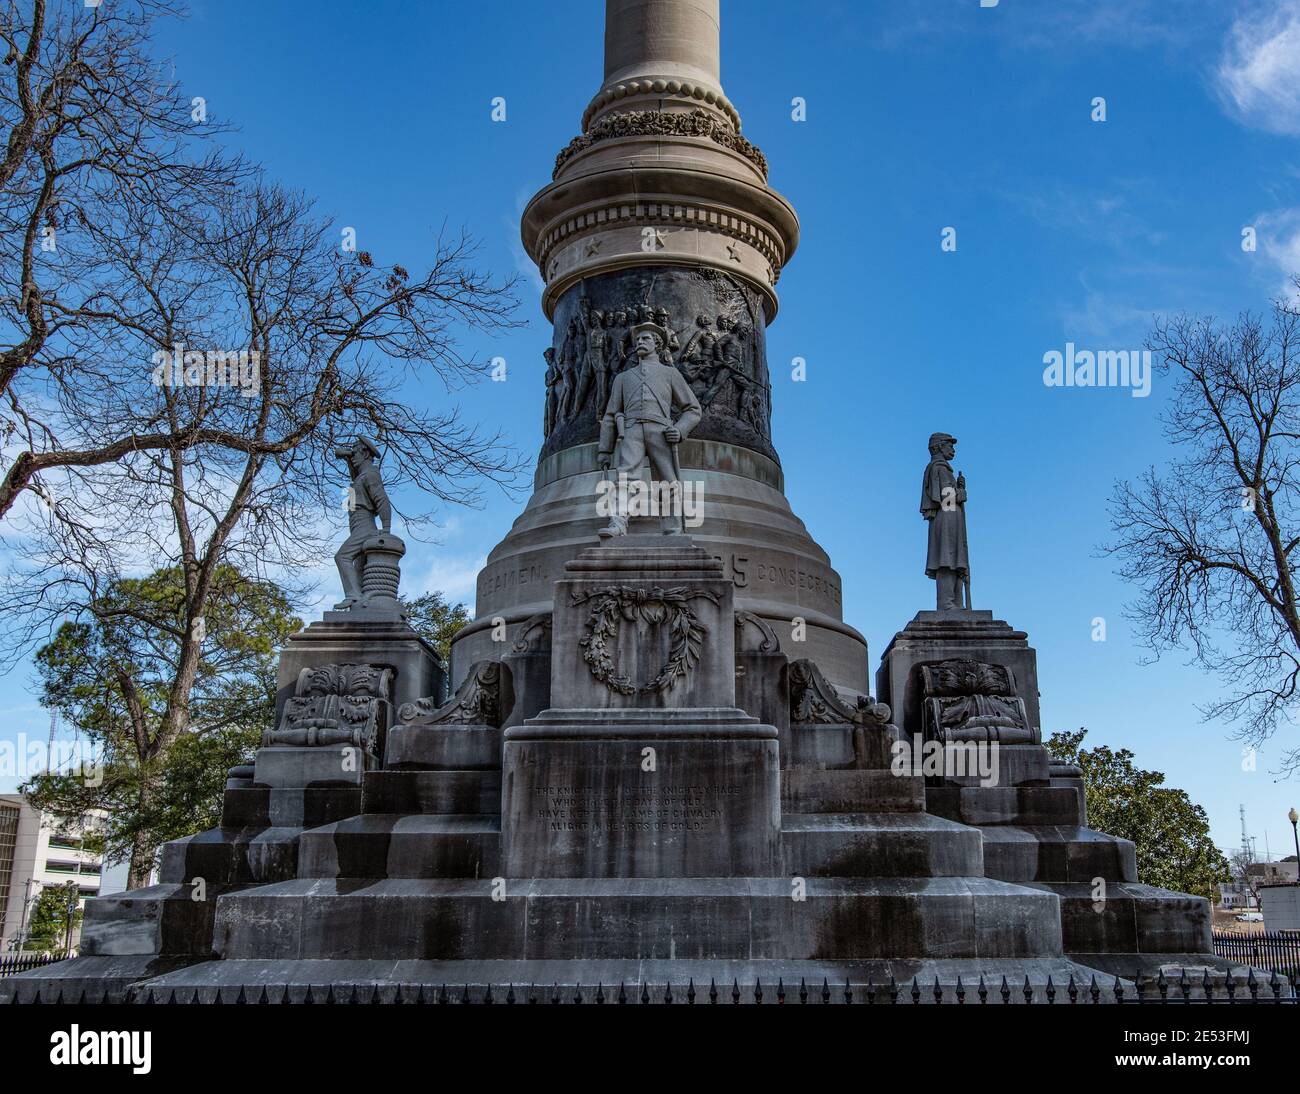 Montgomery, Alabama/USA-January 20, 2018: Confederate Memorial Monument built in 1886 on the state capital grounds., commemorates Alabamians who fough Stock Photo